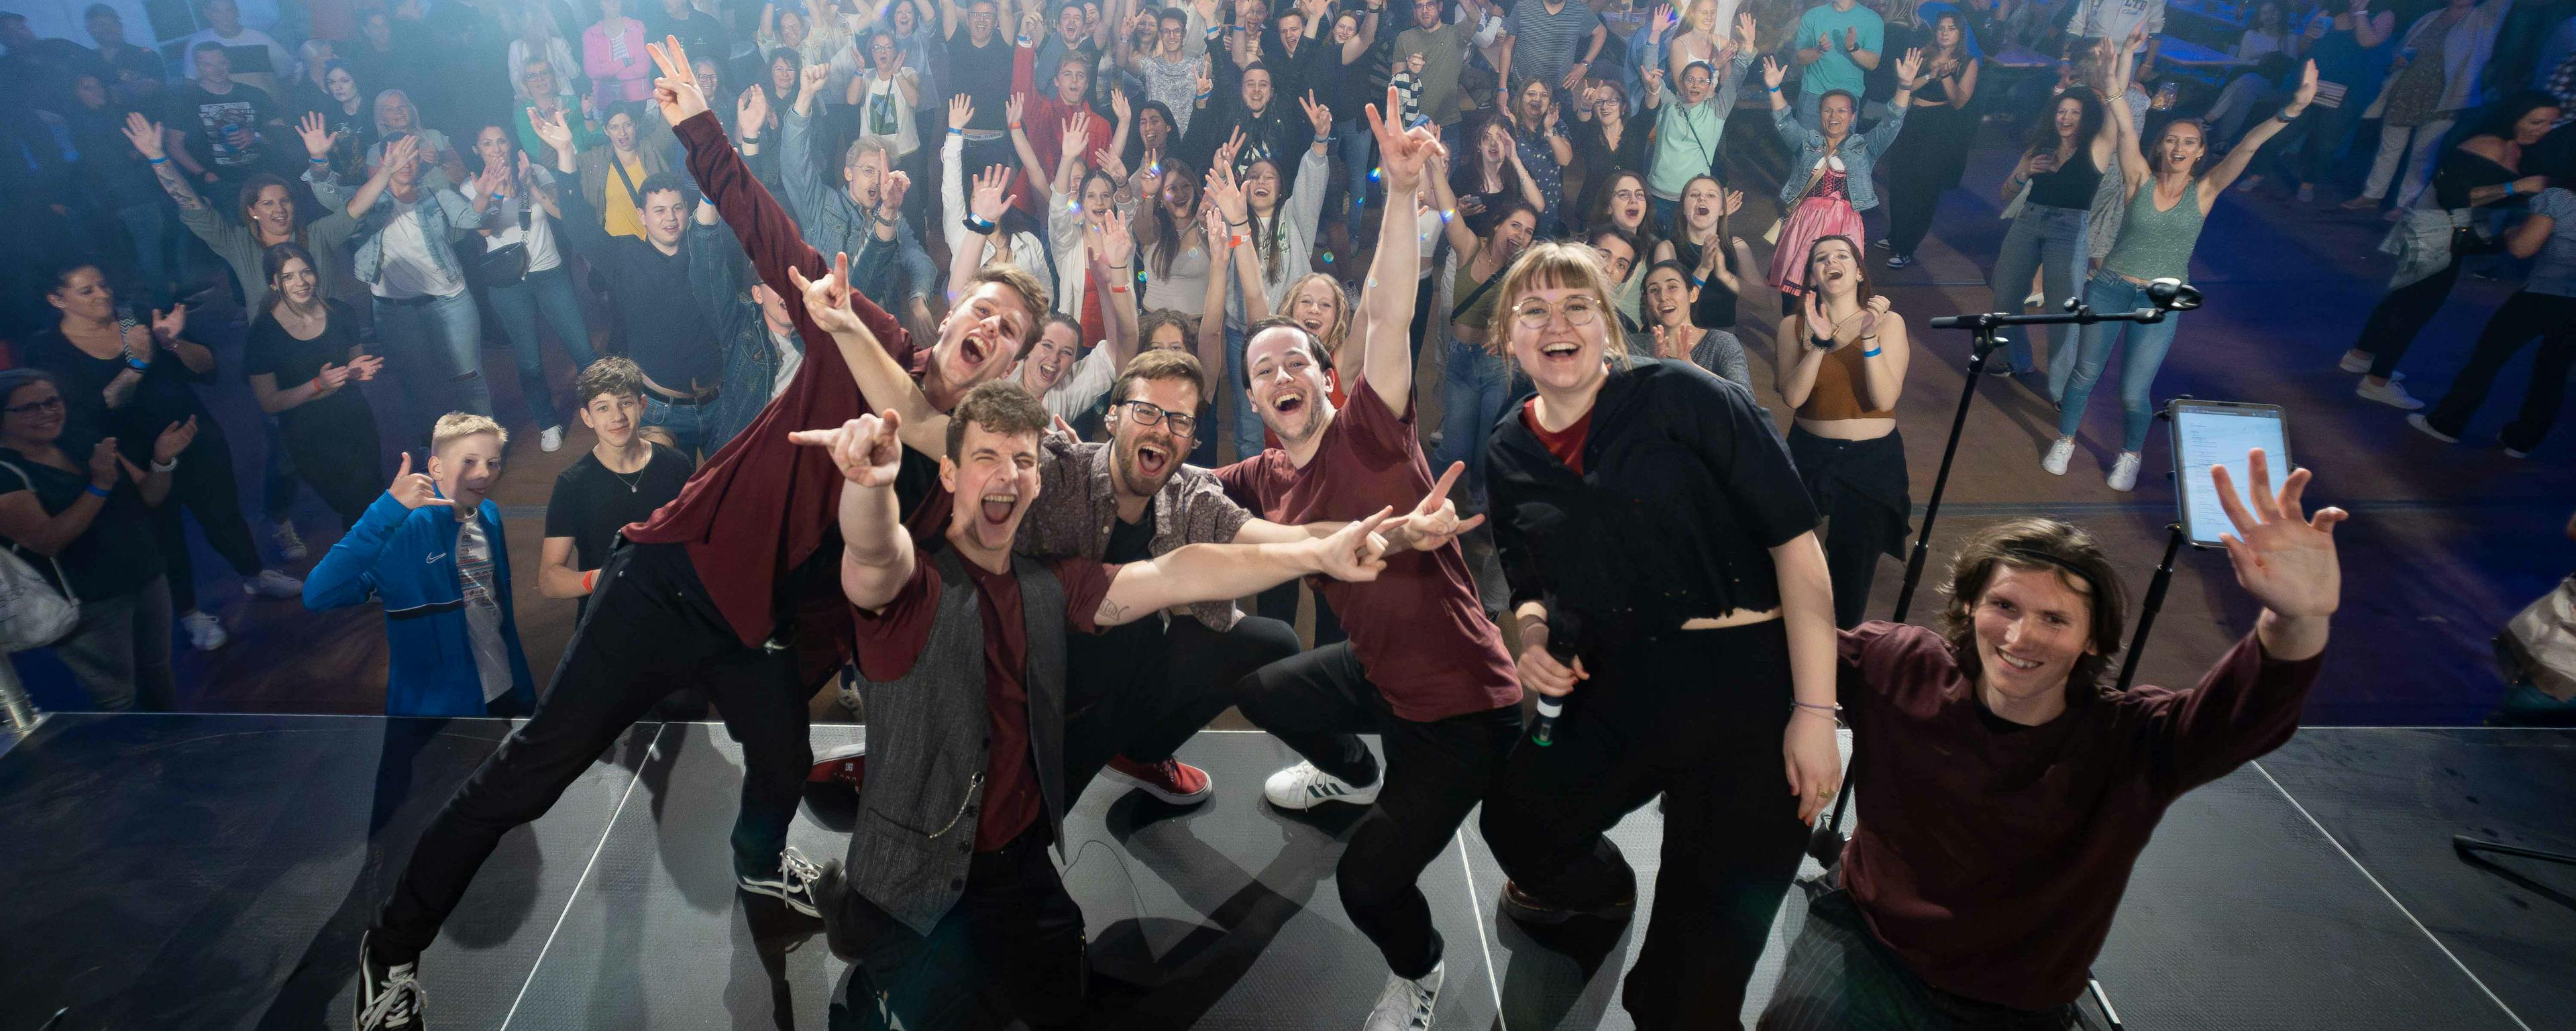 picture of the band celebrating in front of a crowd